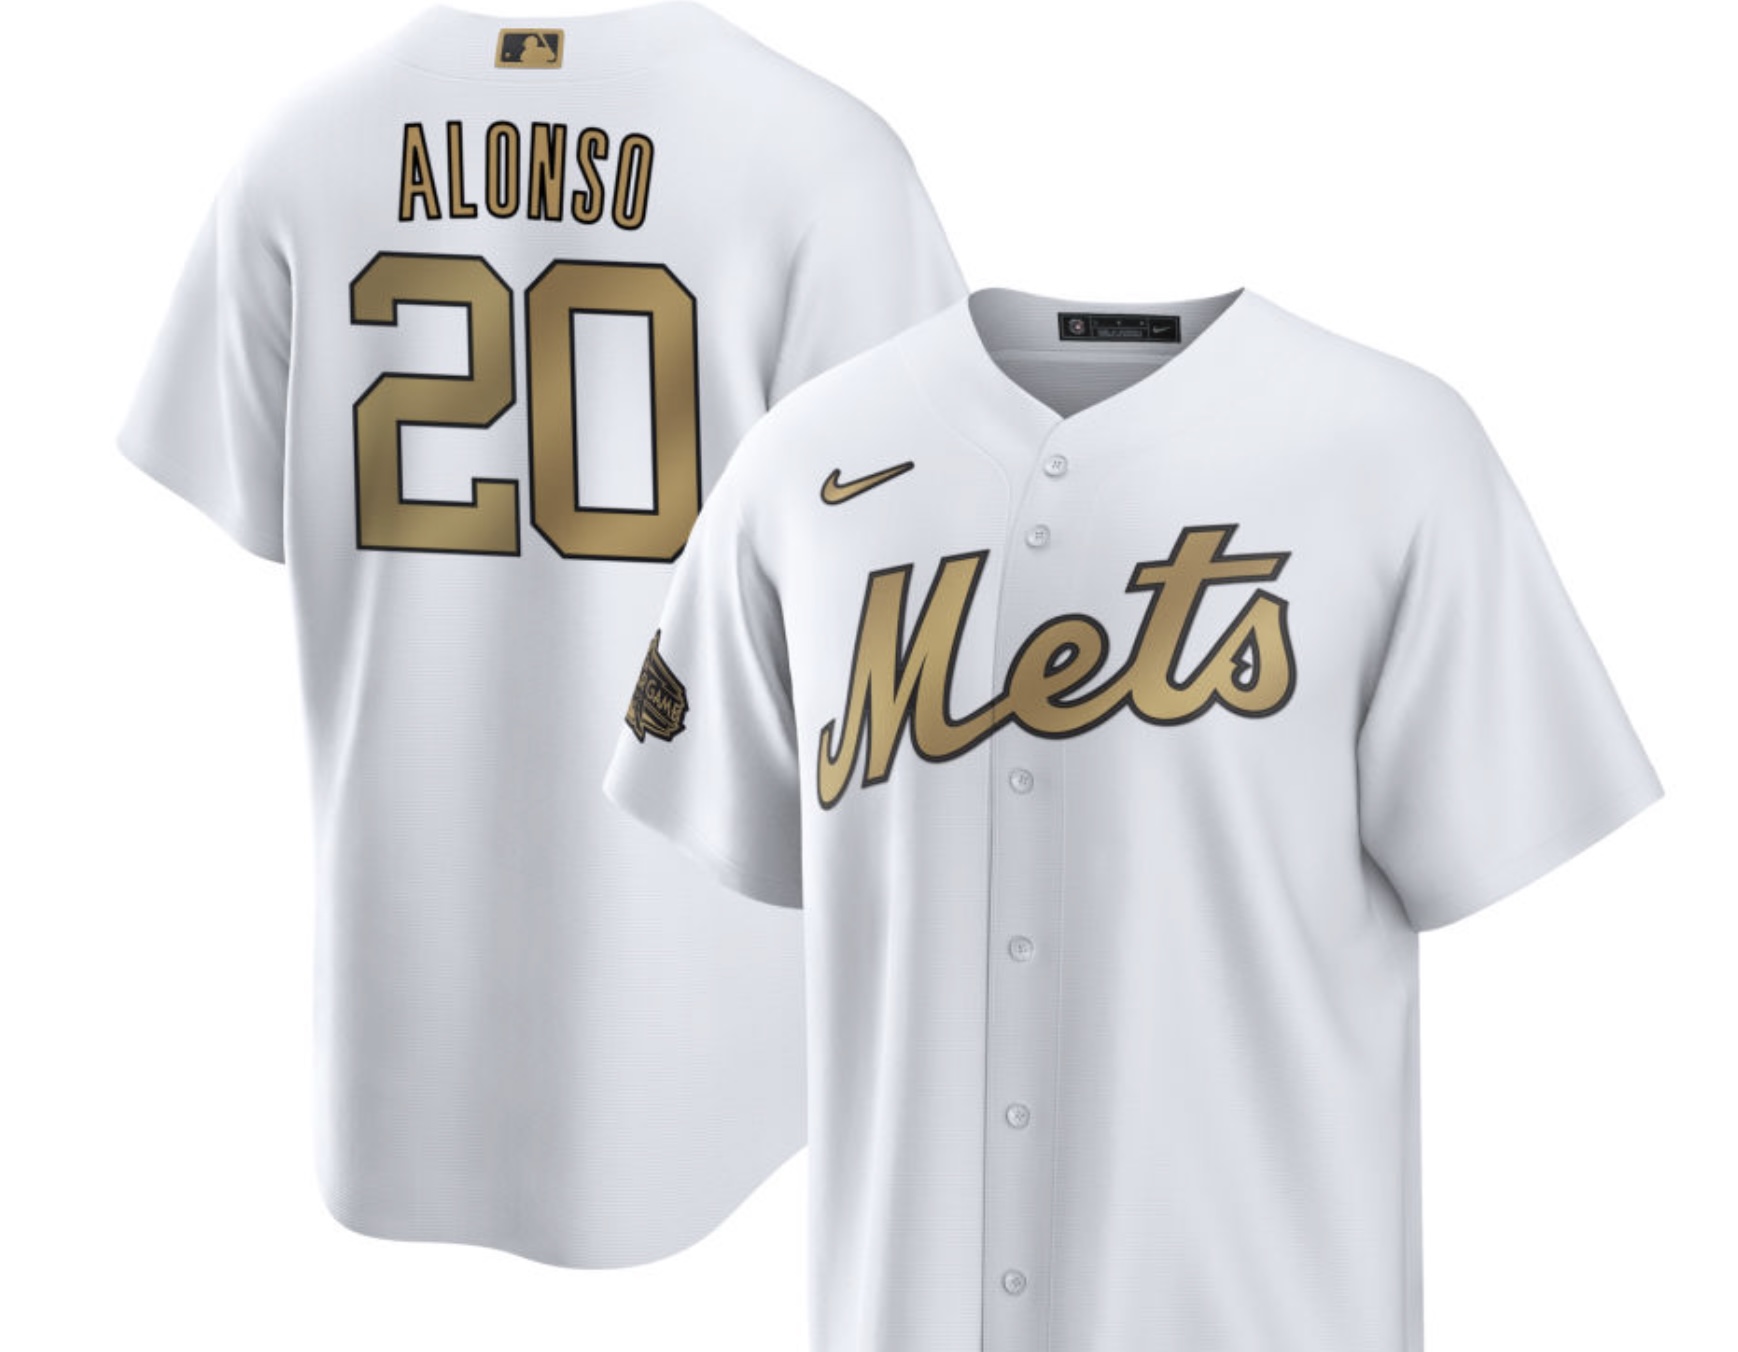 The 2022 Mets All Star Game jerseys - The Mets Police